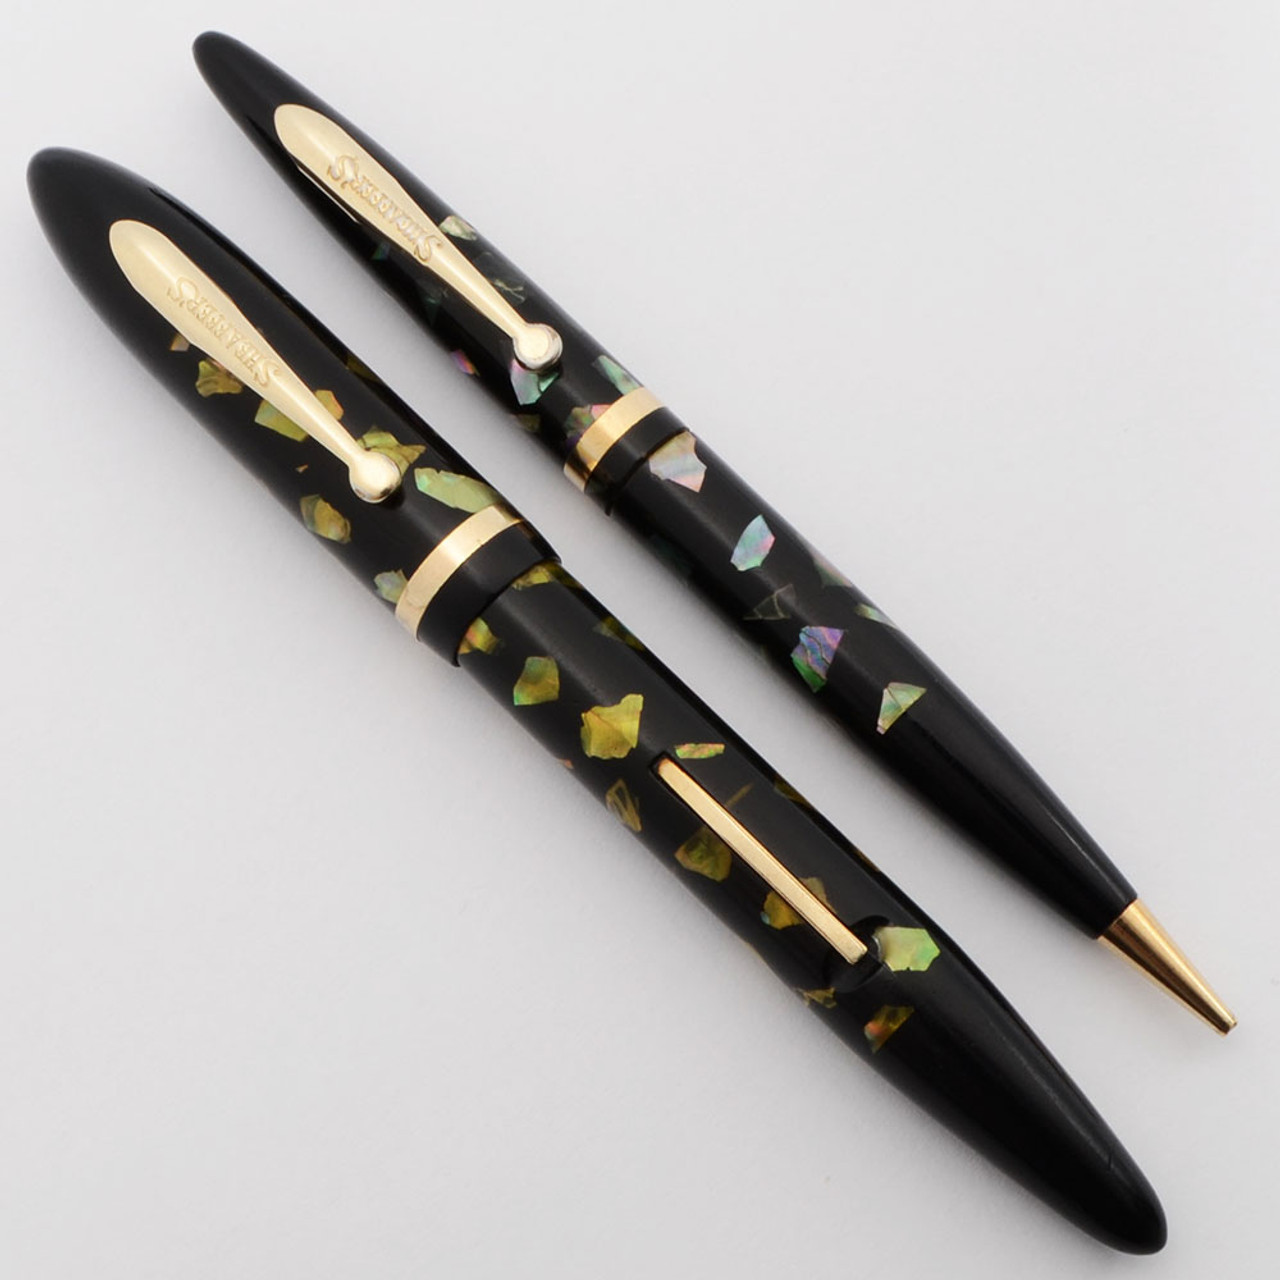 Sheaffer Balance Full Size Set (1930s ) - Ebonized Pearl, Lever Fill, 14k Two-Tone Fine Feather Touch Nib (Excellent, Restored)